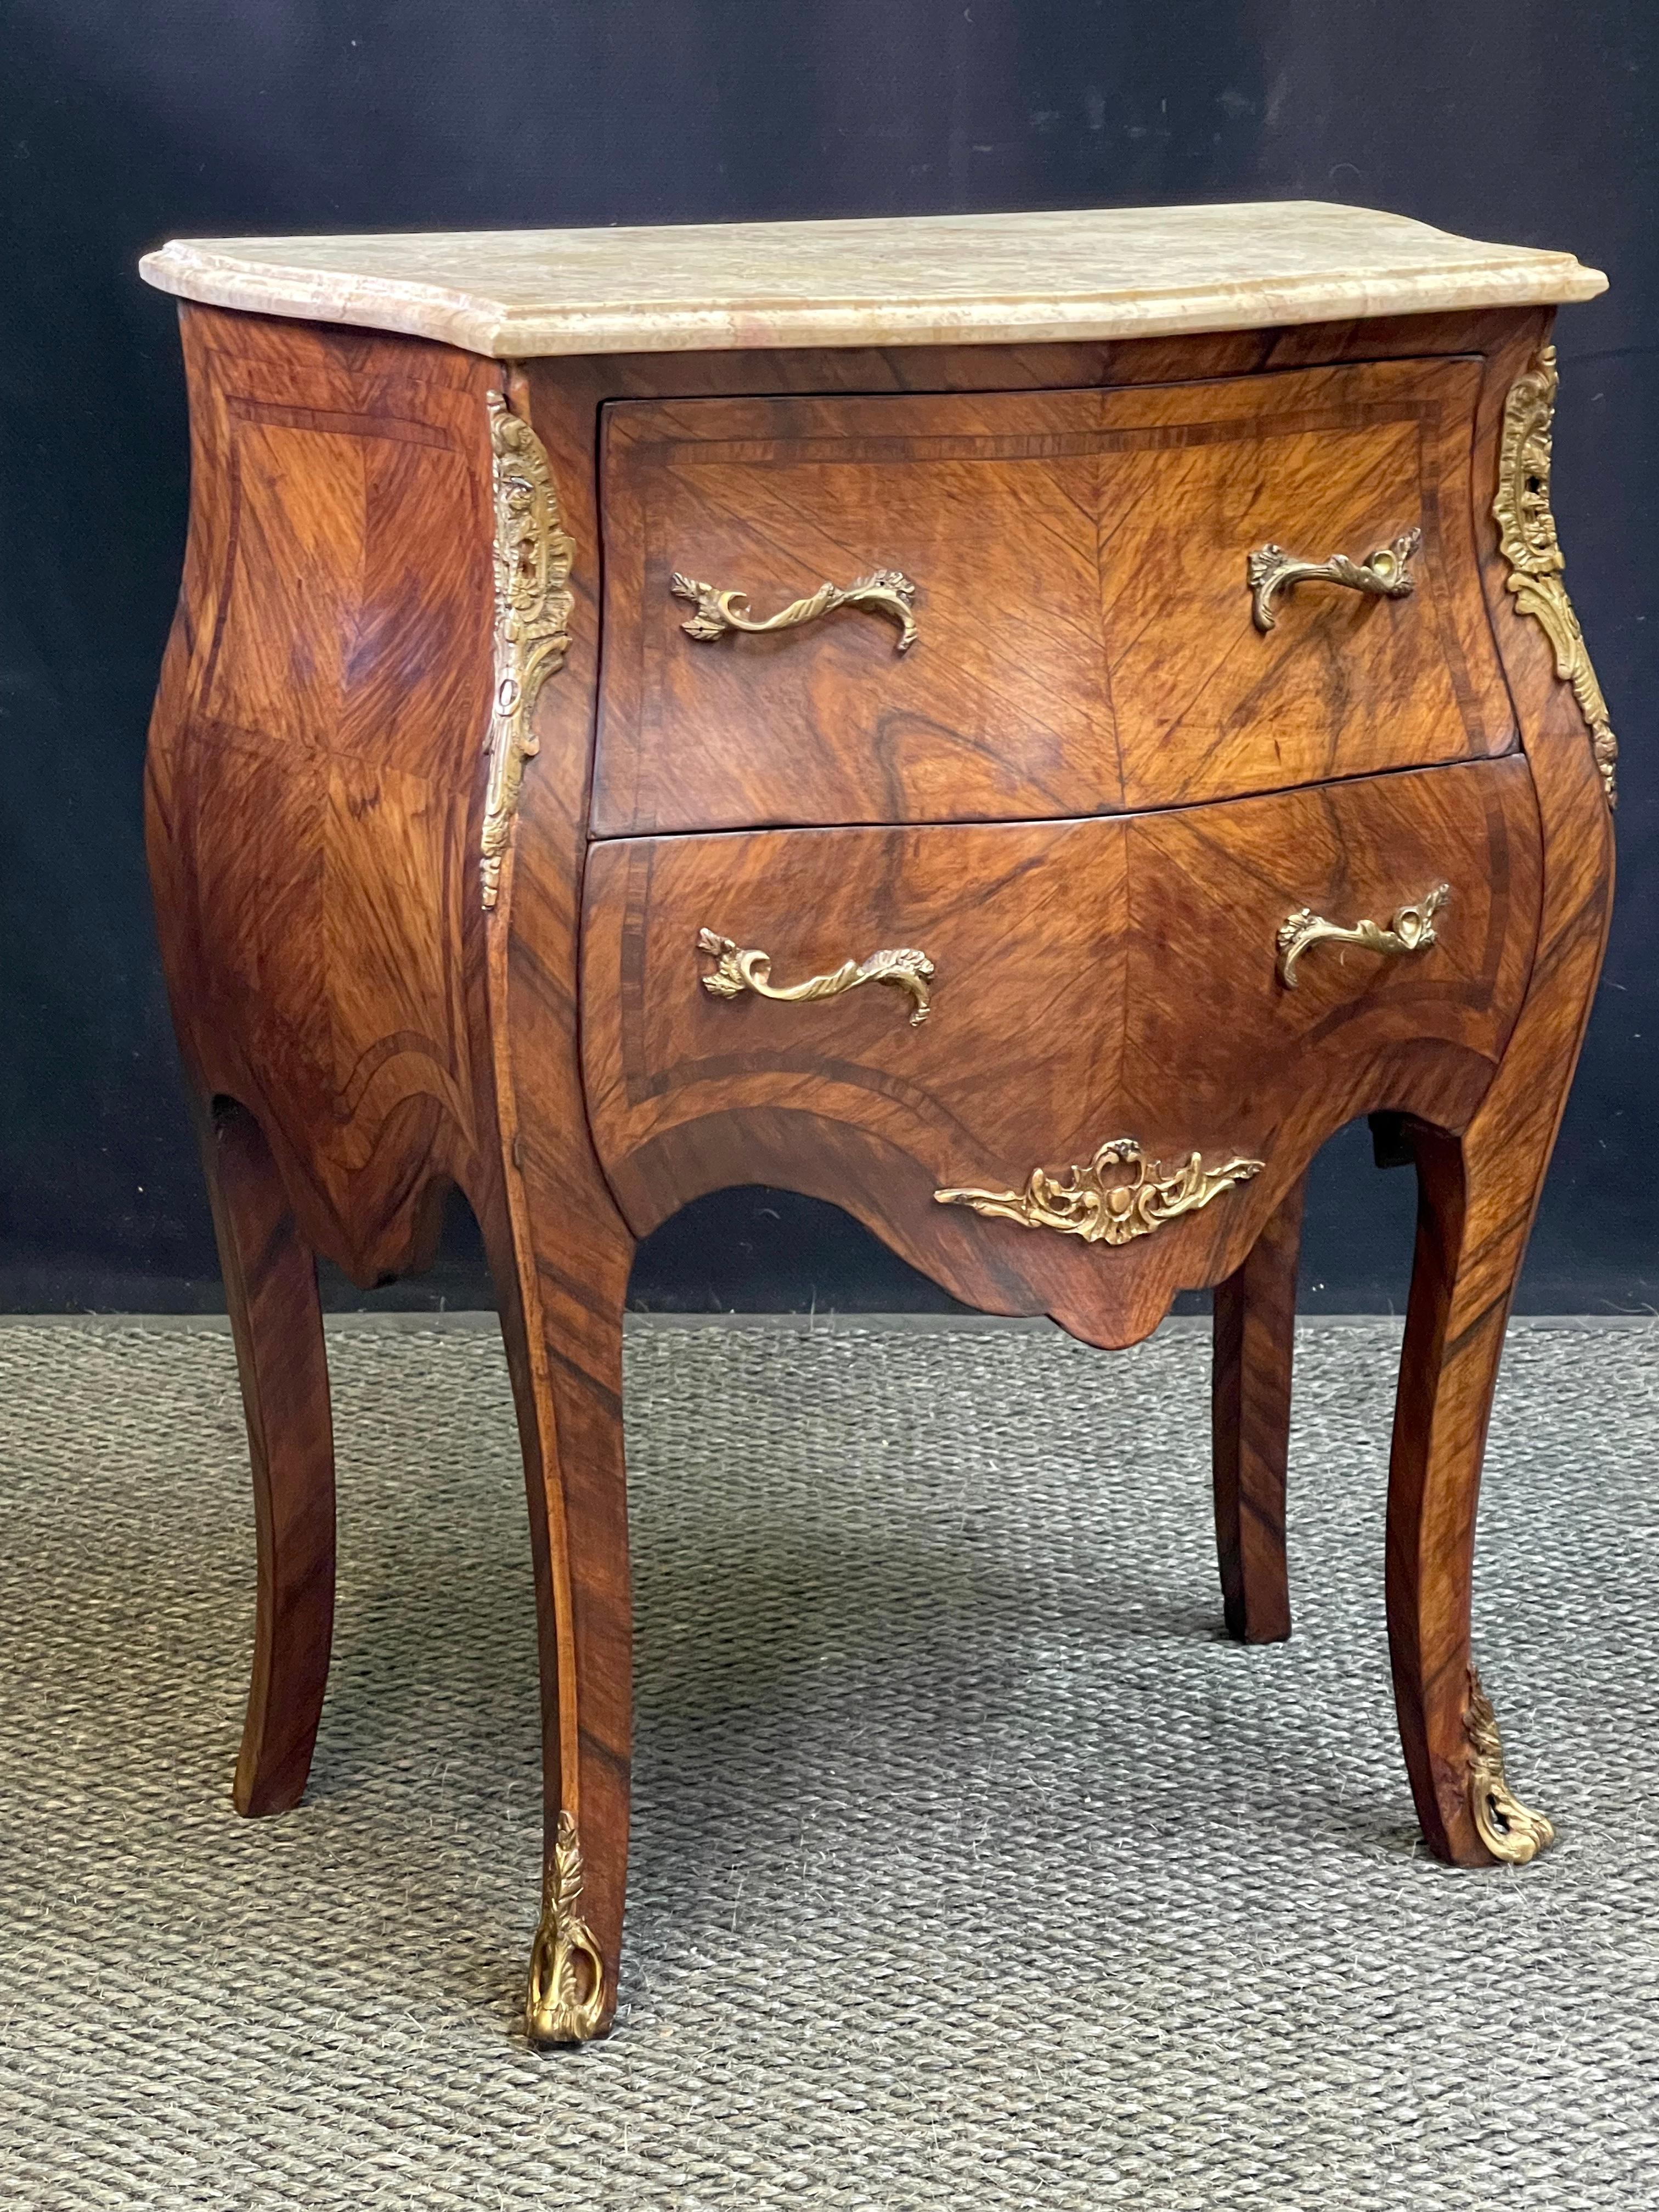 A beautiful late 19th Century French bombe petite commode in the style of Louis XV, made with walnut butterfly veneer and rosewood inlay. A shaped marble top rests on a narrow case holding two drawers and having hardware and ornaments made of